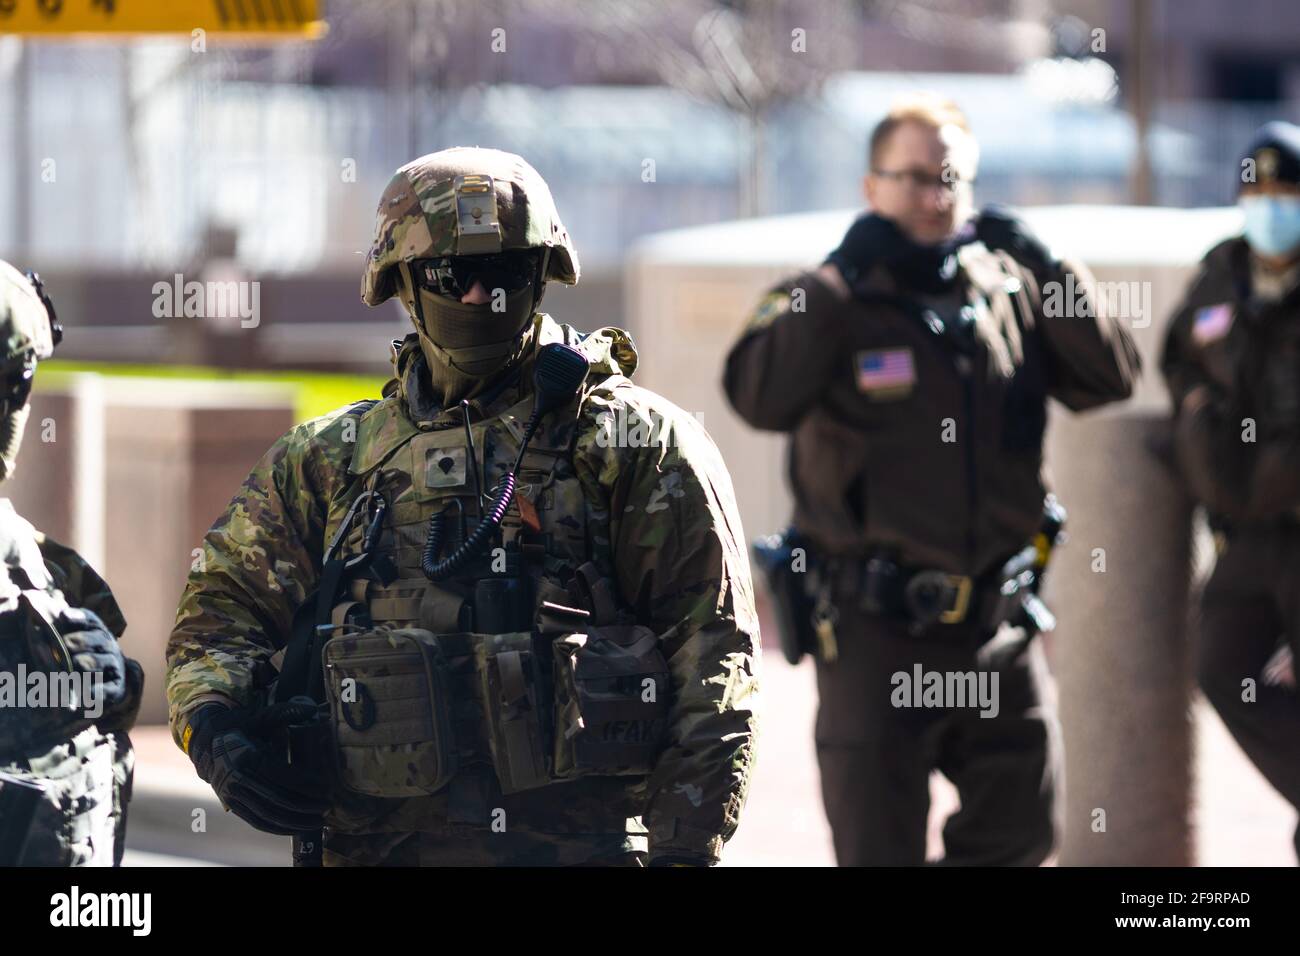 National Guard members and Hennepin County Sheriff Deputies are seen standing guard at the Hennepin County Courthouse in Minneapolis, Minnesota on April 20, 2021.  A verdict is anticipated as the jury deliberates in the trial of Derek Chauvin for the murder of George Floyd.  (Photo by Brian Feinzimer/Sipa USA) Stock Photo